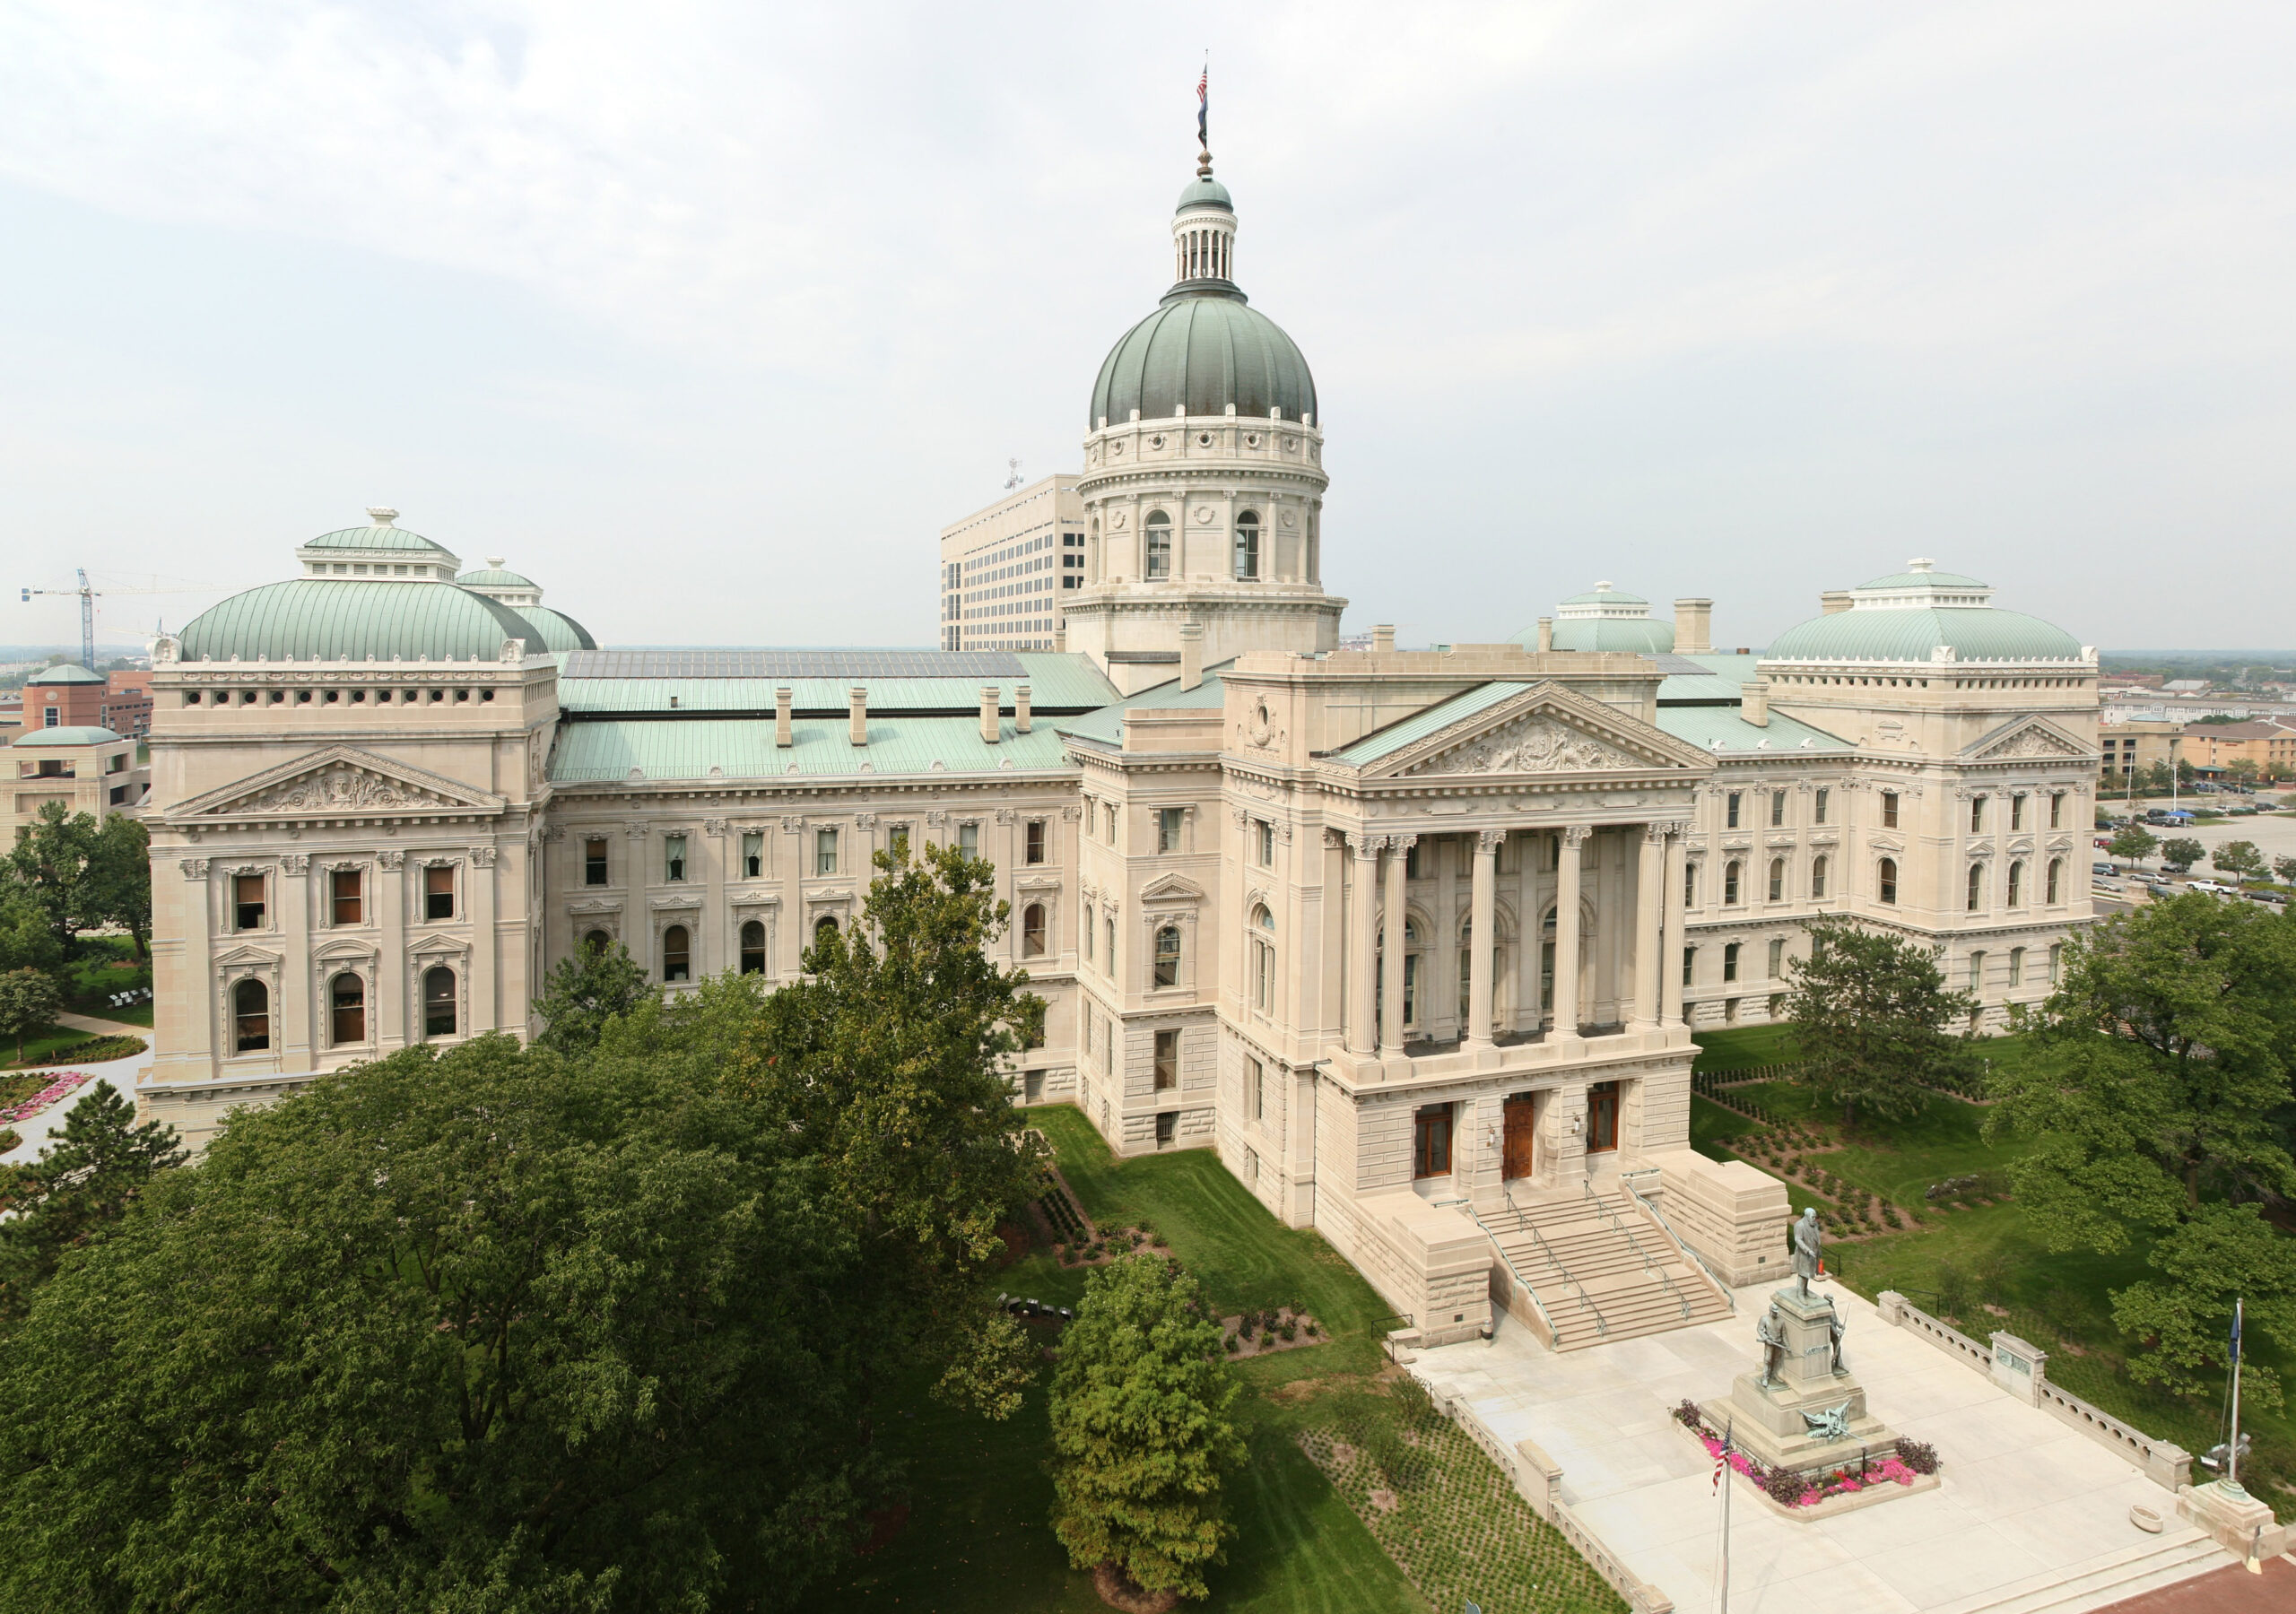 The Indiana state capitol building in Indianapolis, Indiana.